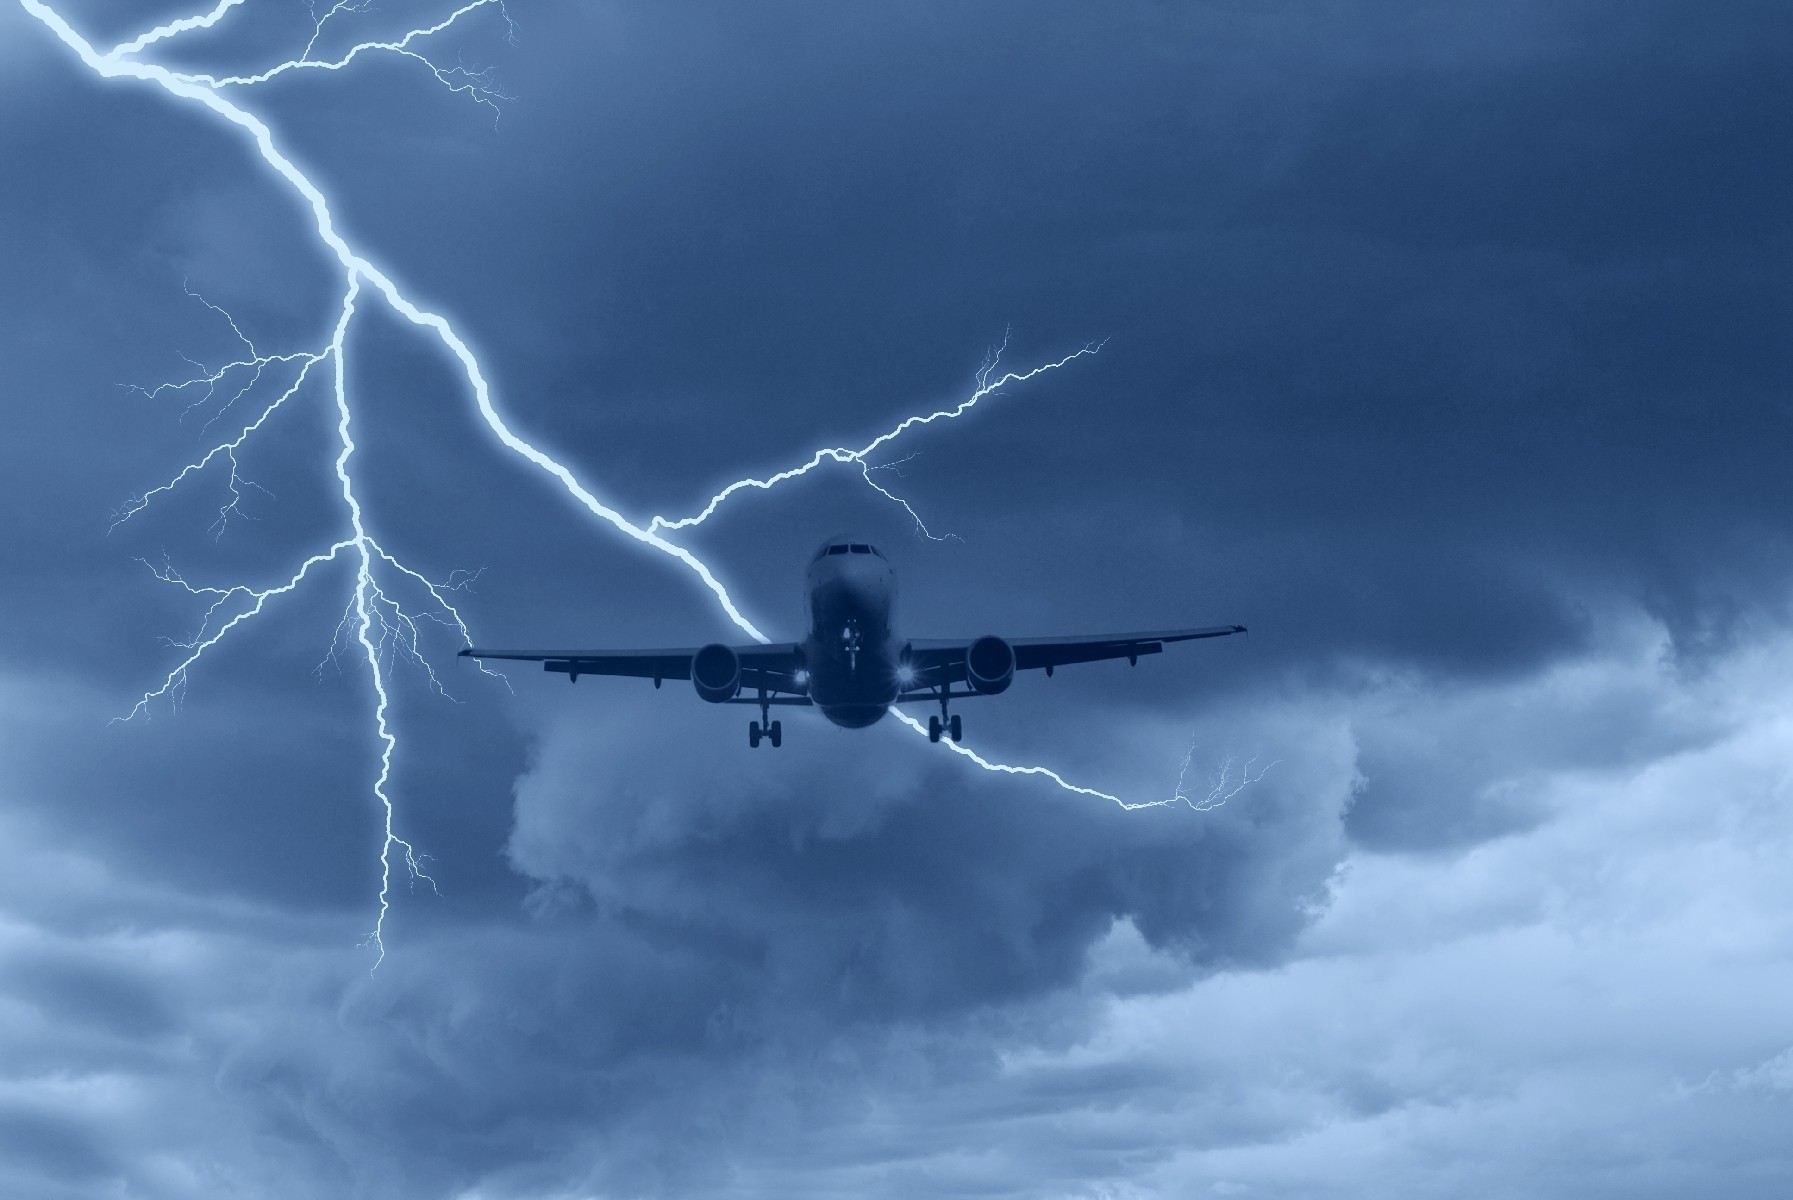 <p>Here’s a <a href="http://www.telegraph.co.uk/travel/travel-truths/The-secrets-of-air-travel/secrets10/" rel="noreferrer noopener">shocking fact</a>: airplanes are struck by lightning far more often than you might think. An average jetliner gets hit every two or three years. But the good news is that airplanes are designed to take this into their flying stride, discharging the energy through their aluminum skin and leaving the passenger cabins safe.</p>